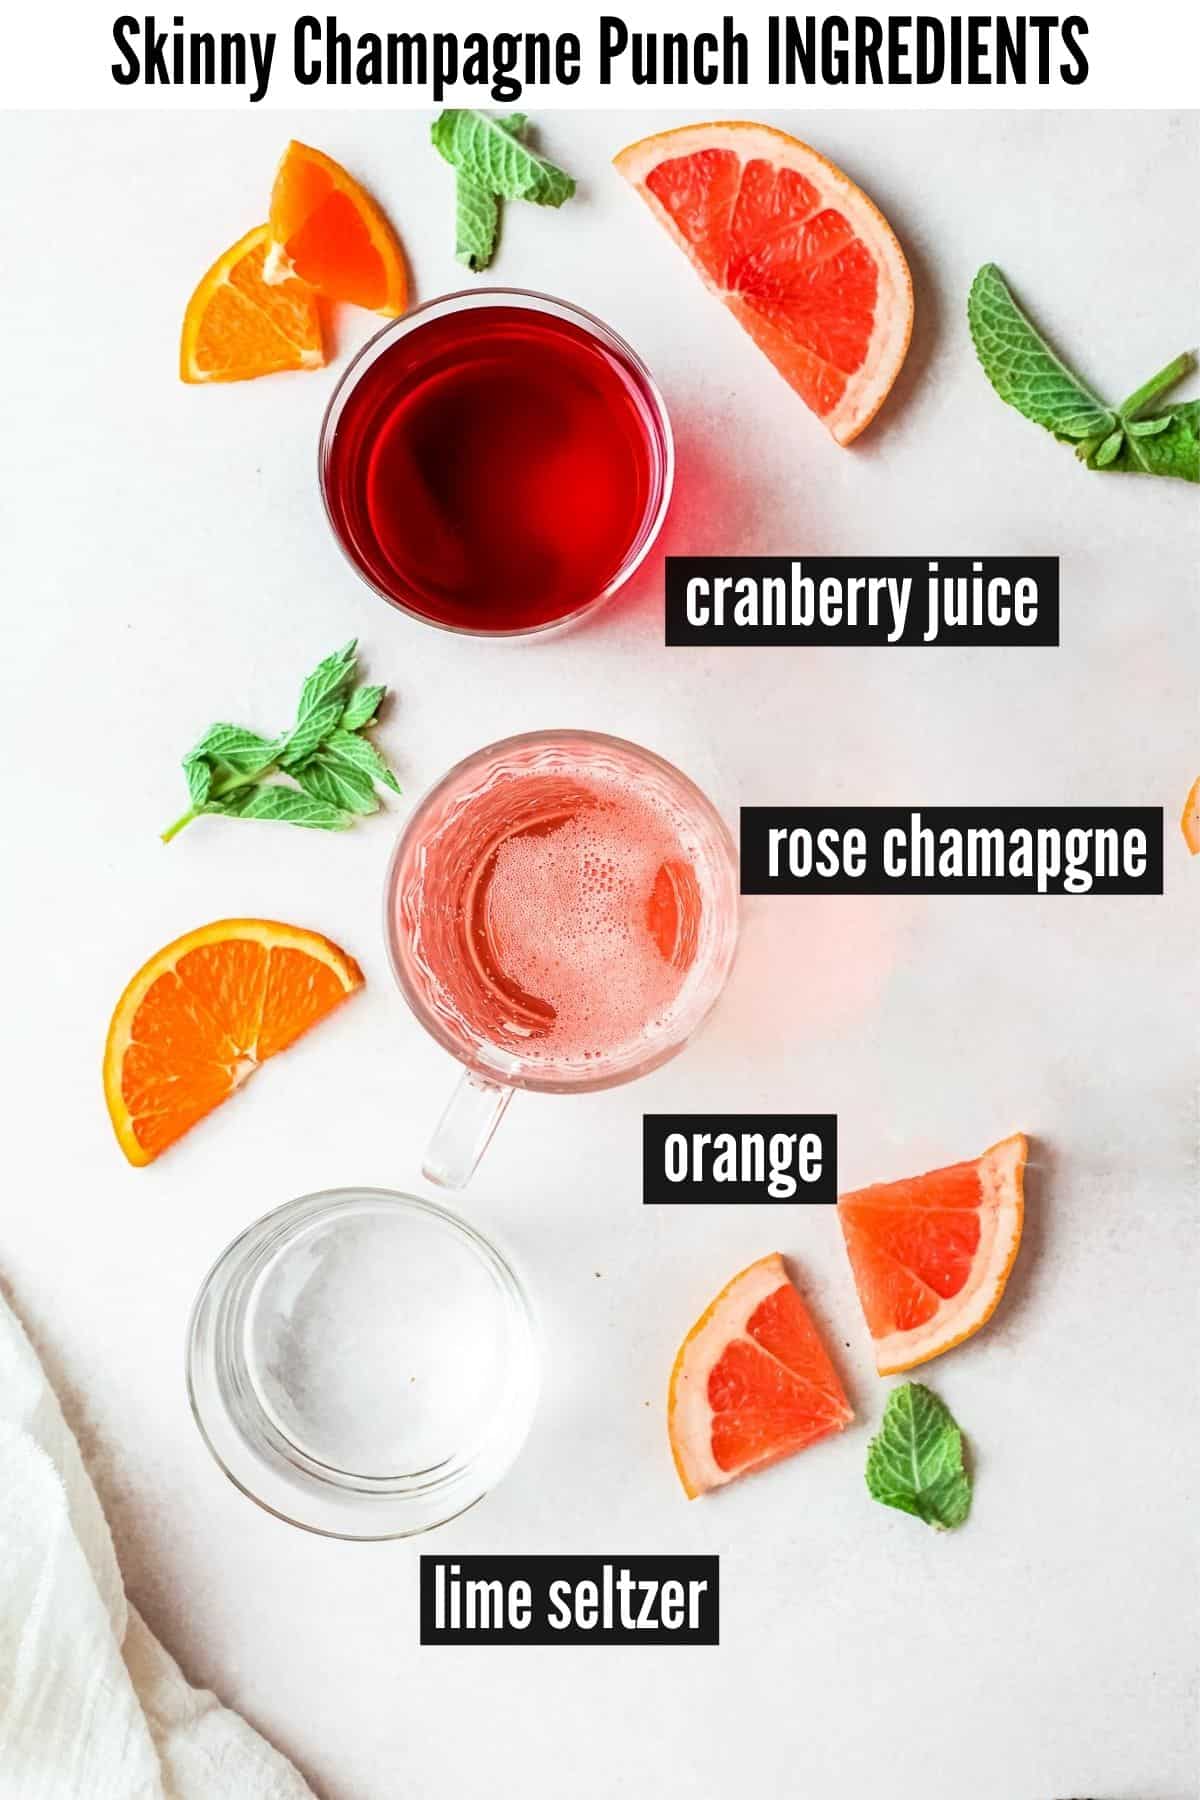 champagne punch labelled ingredients